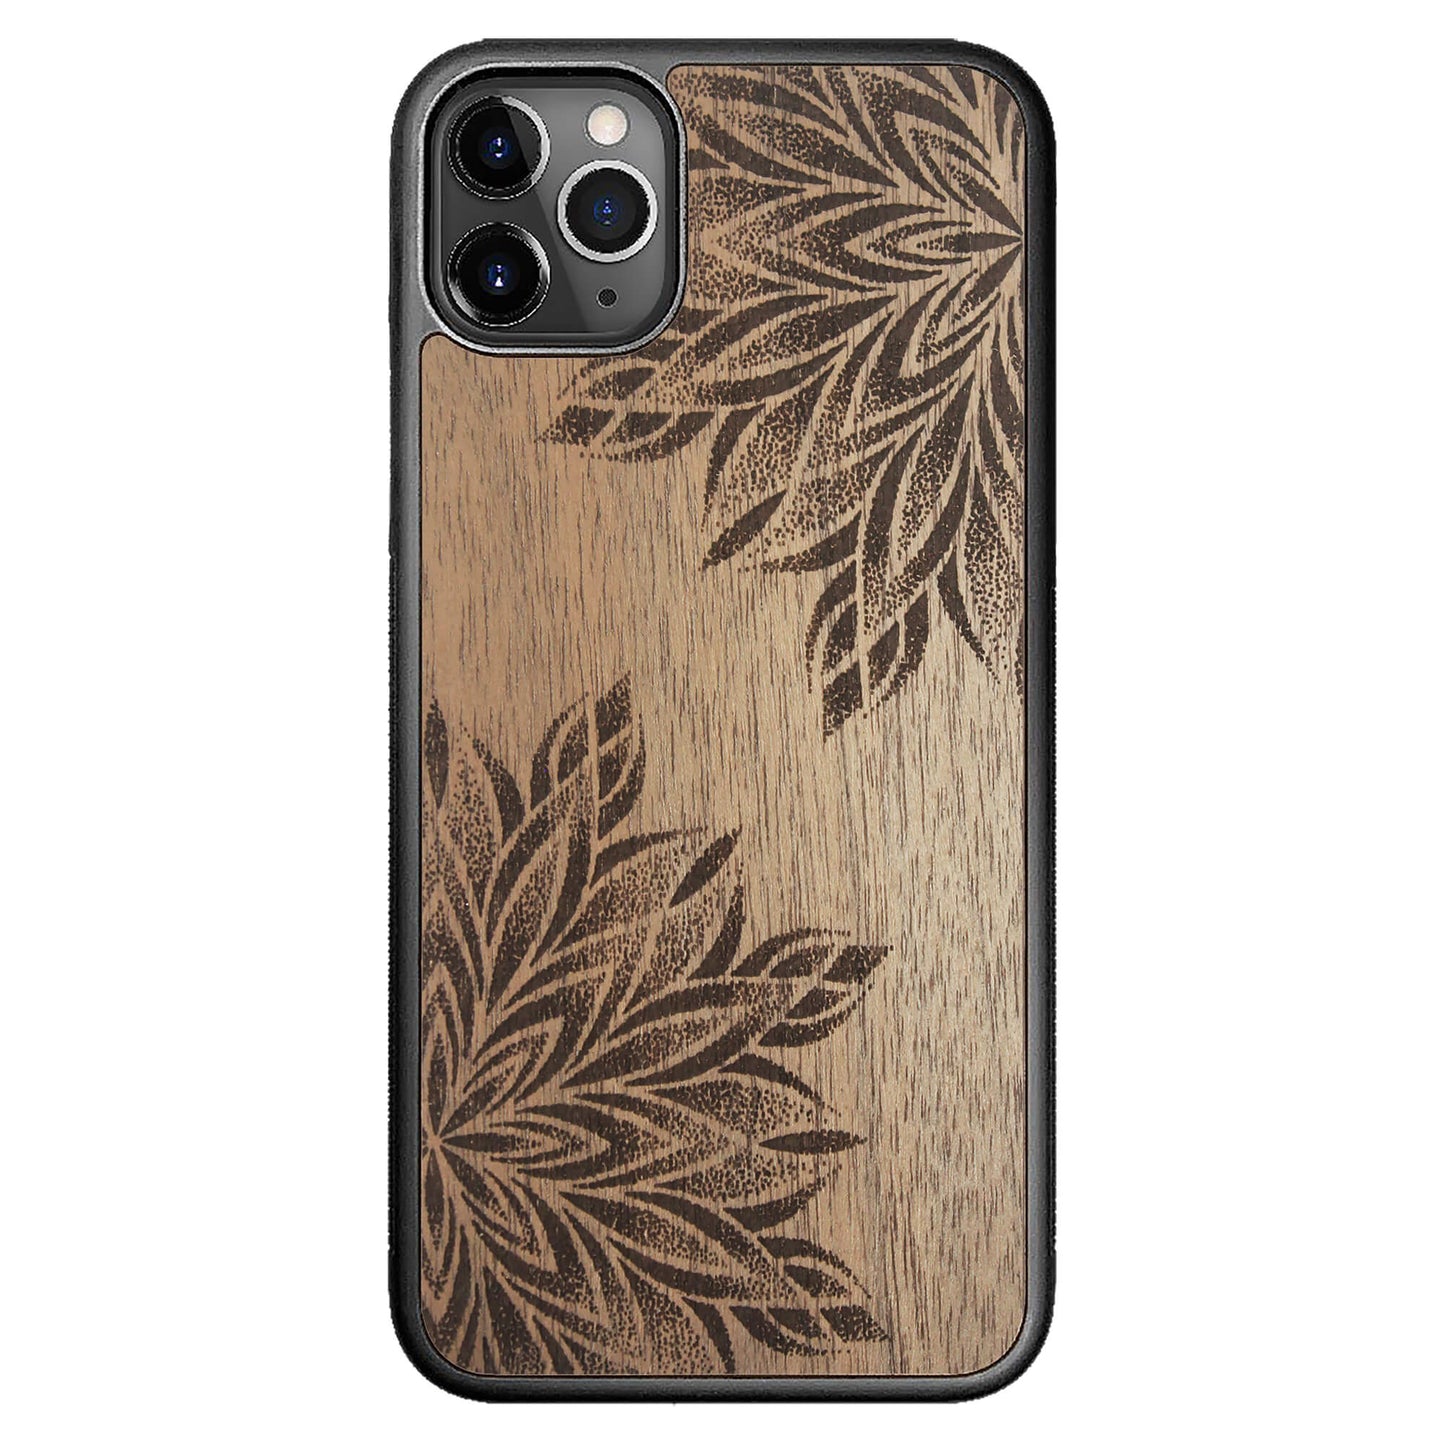 Wooden Case for iPhone 11 Pro Max Mandala